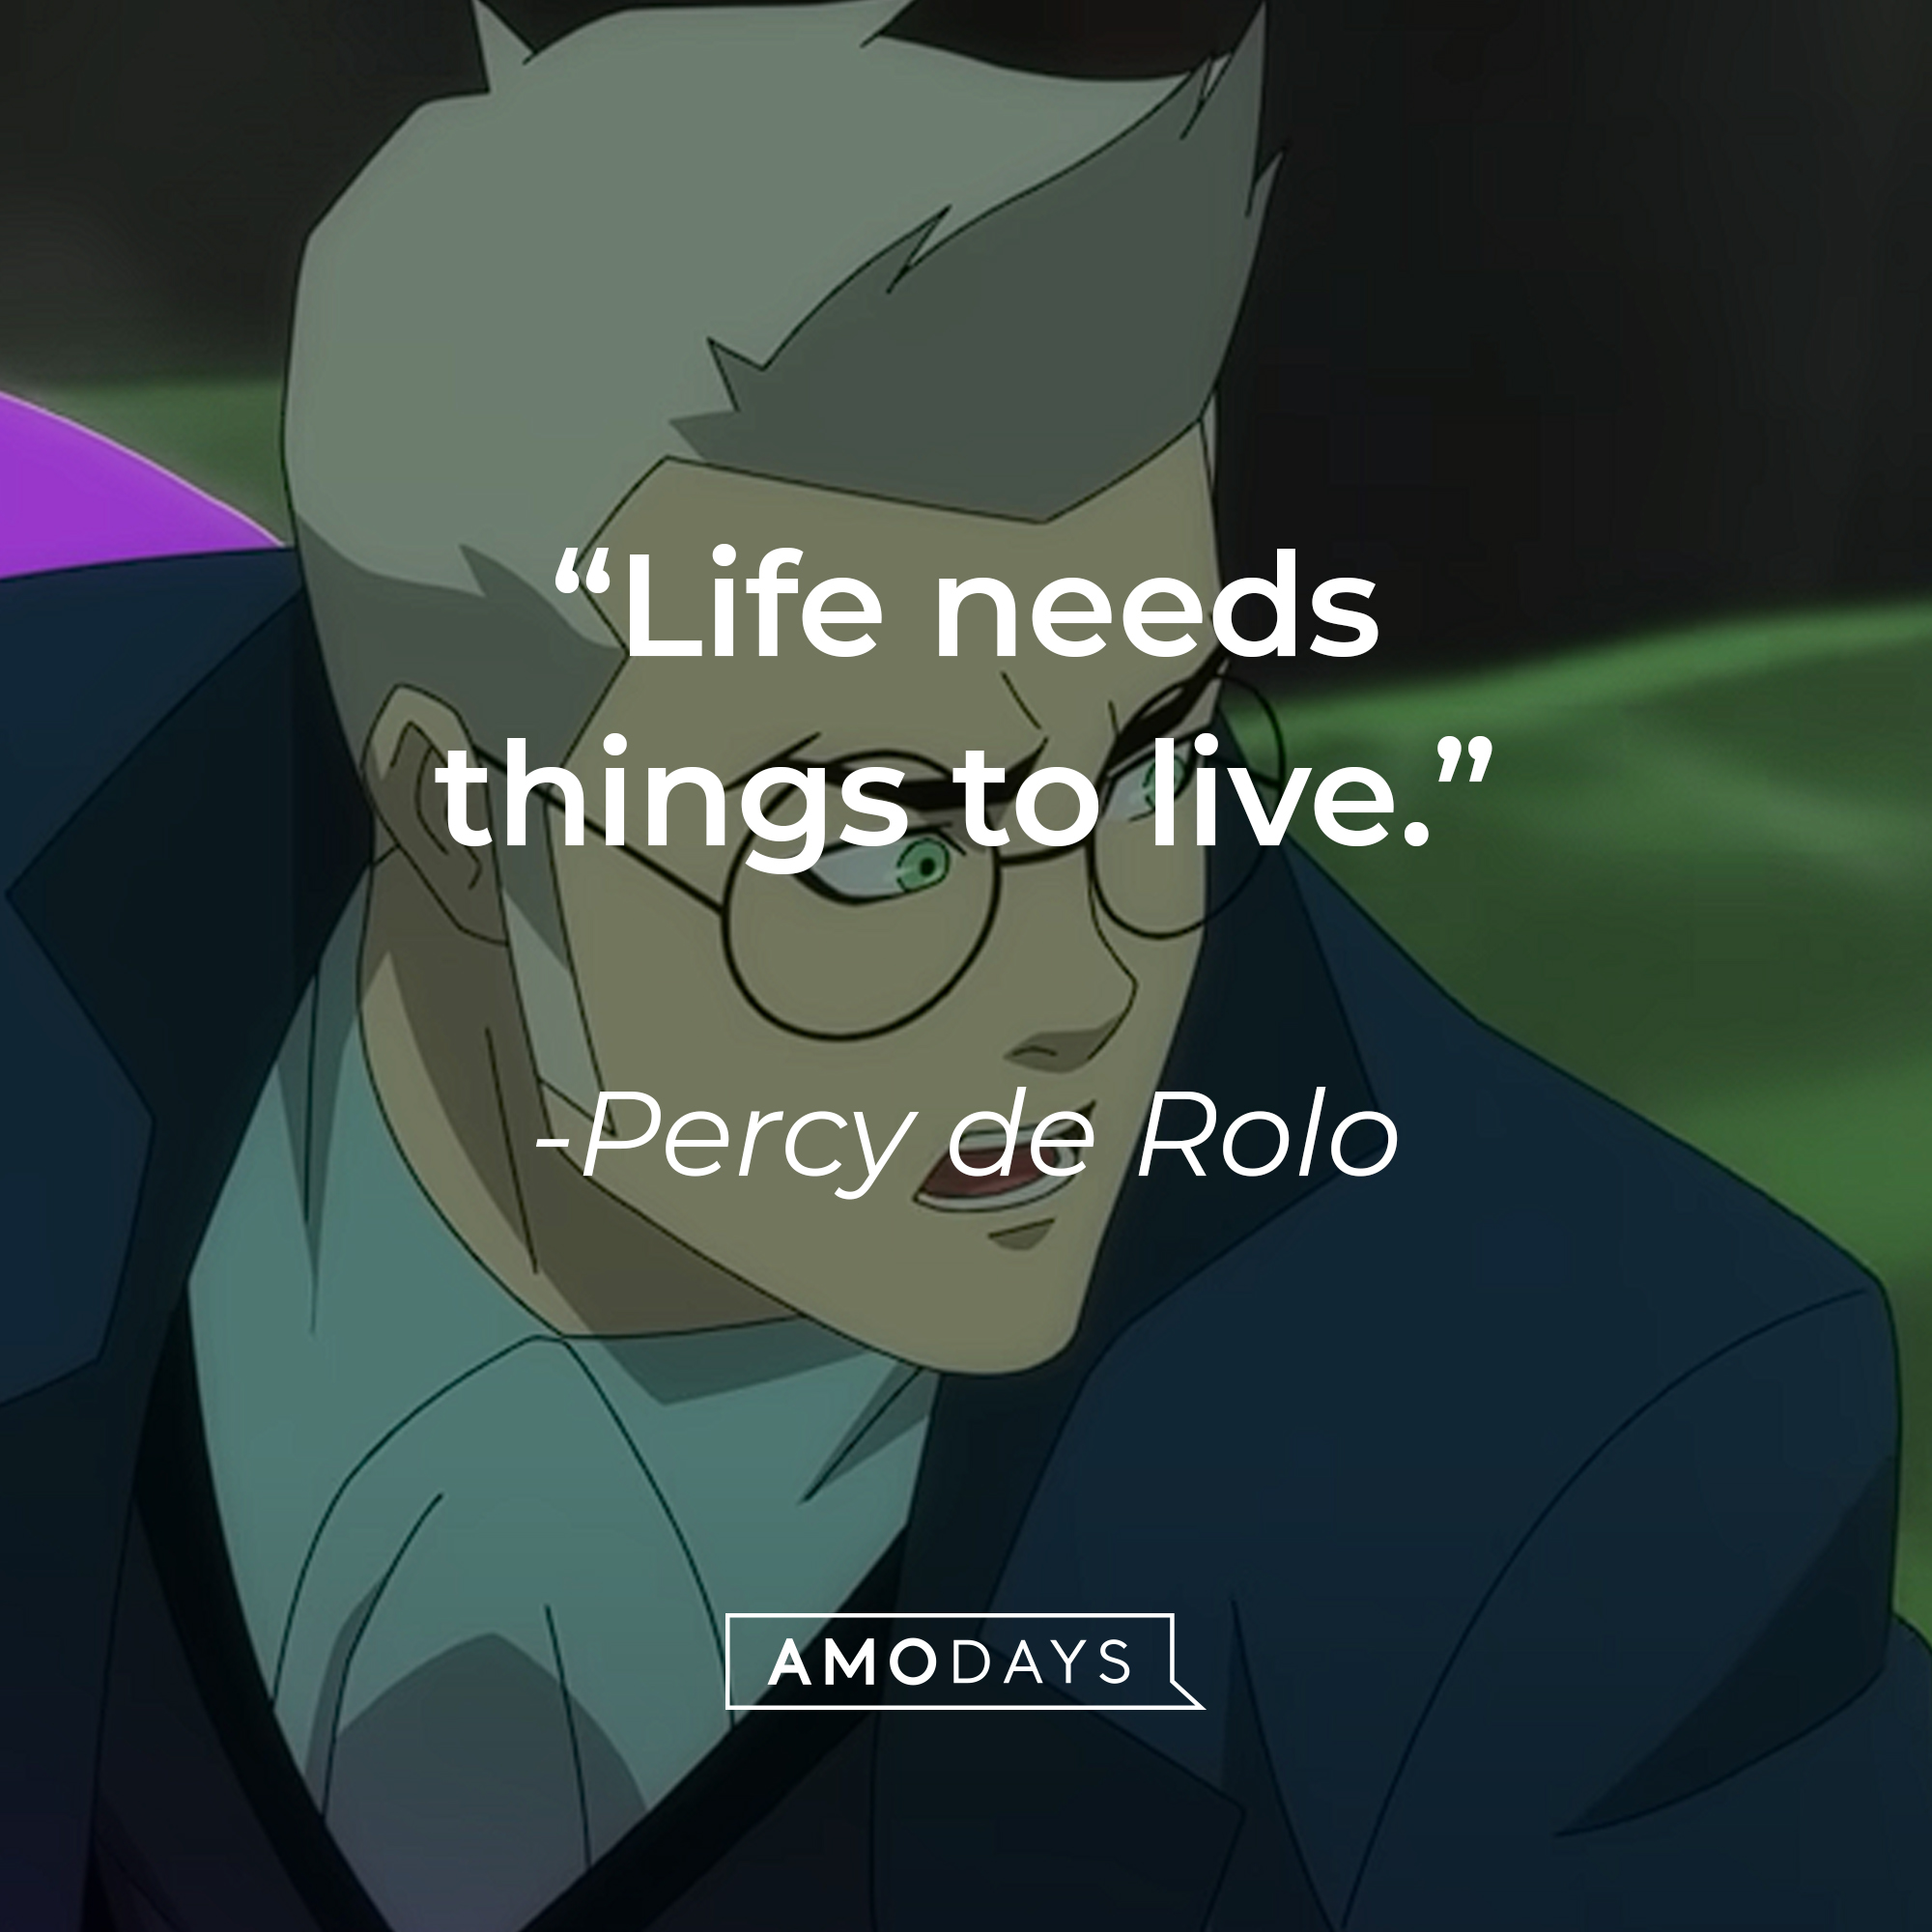 An image of Percy de Rolo with his  quote:  “Life needs things to live.” | Source: youtube.com/PrimeVideo